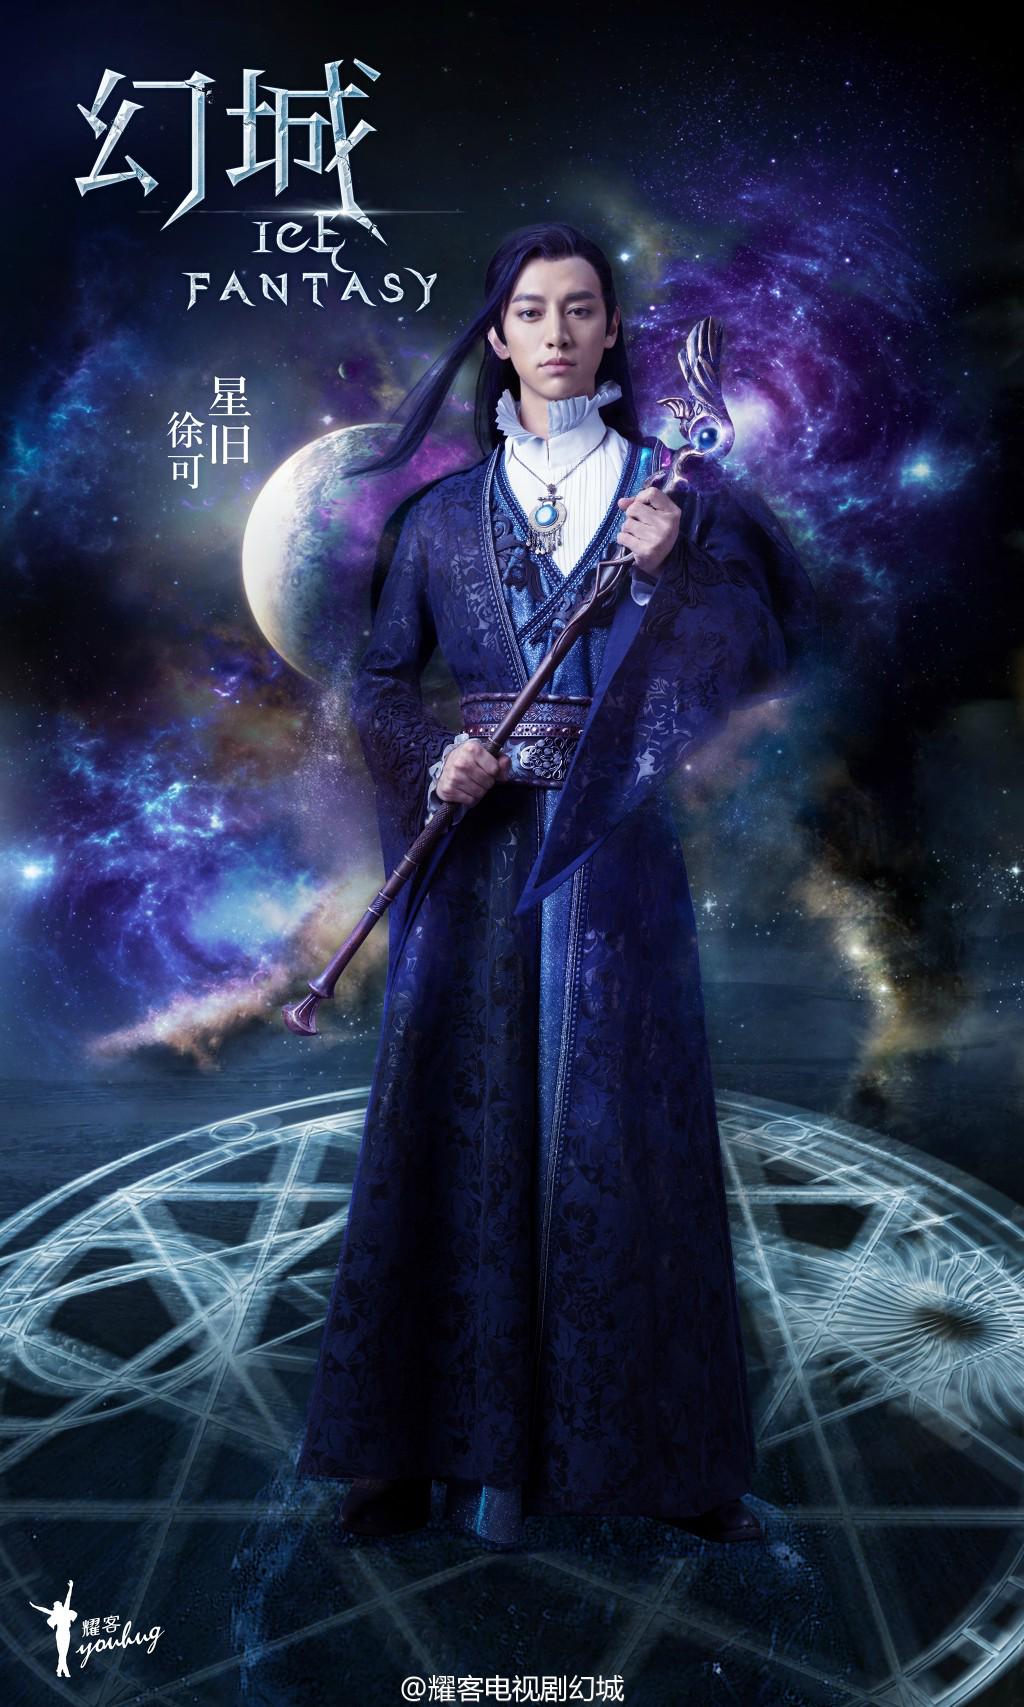 Ice Fantasy Updates On Xu S Posters T